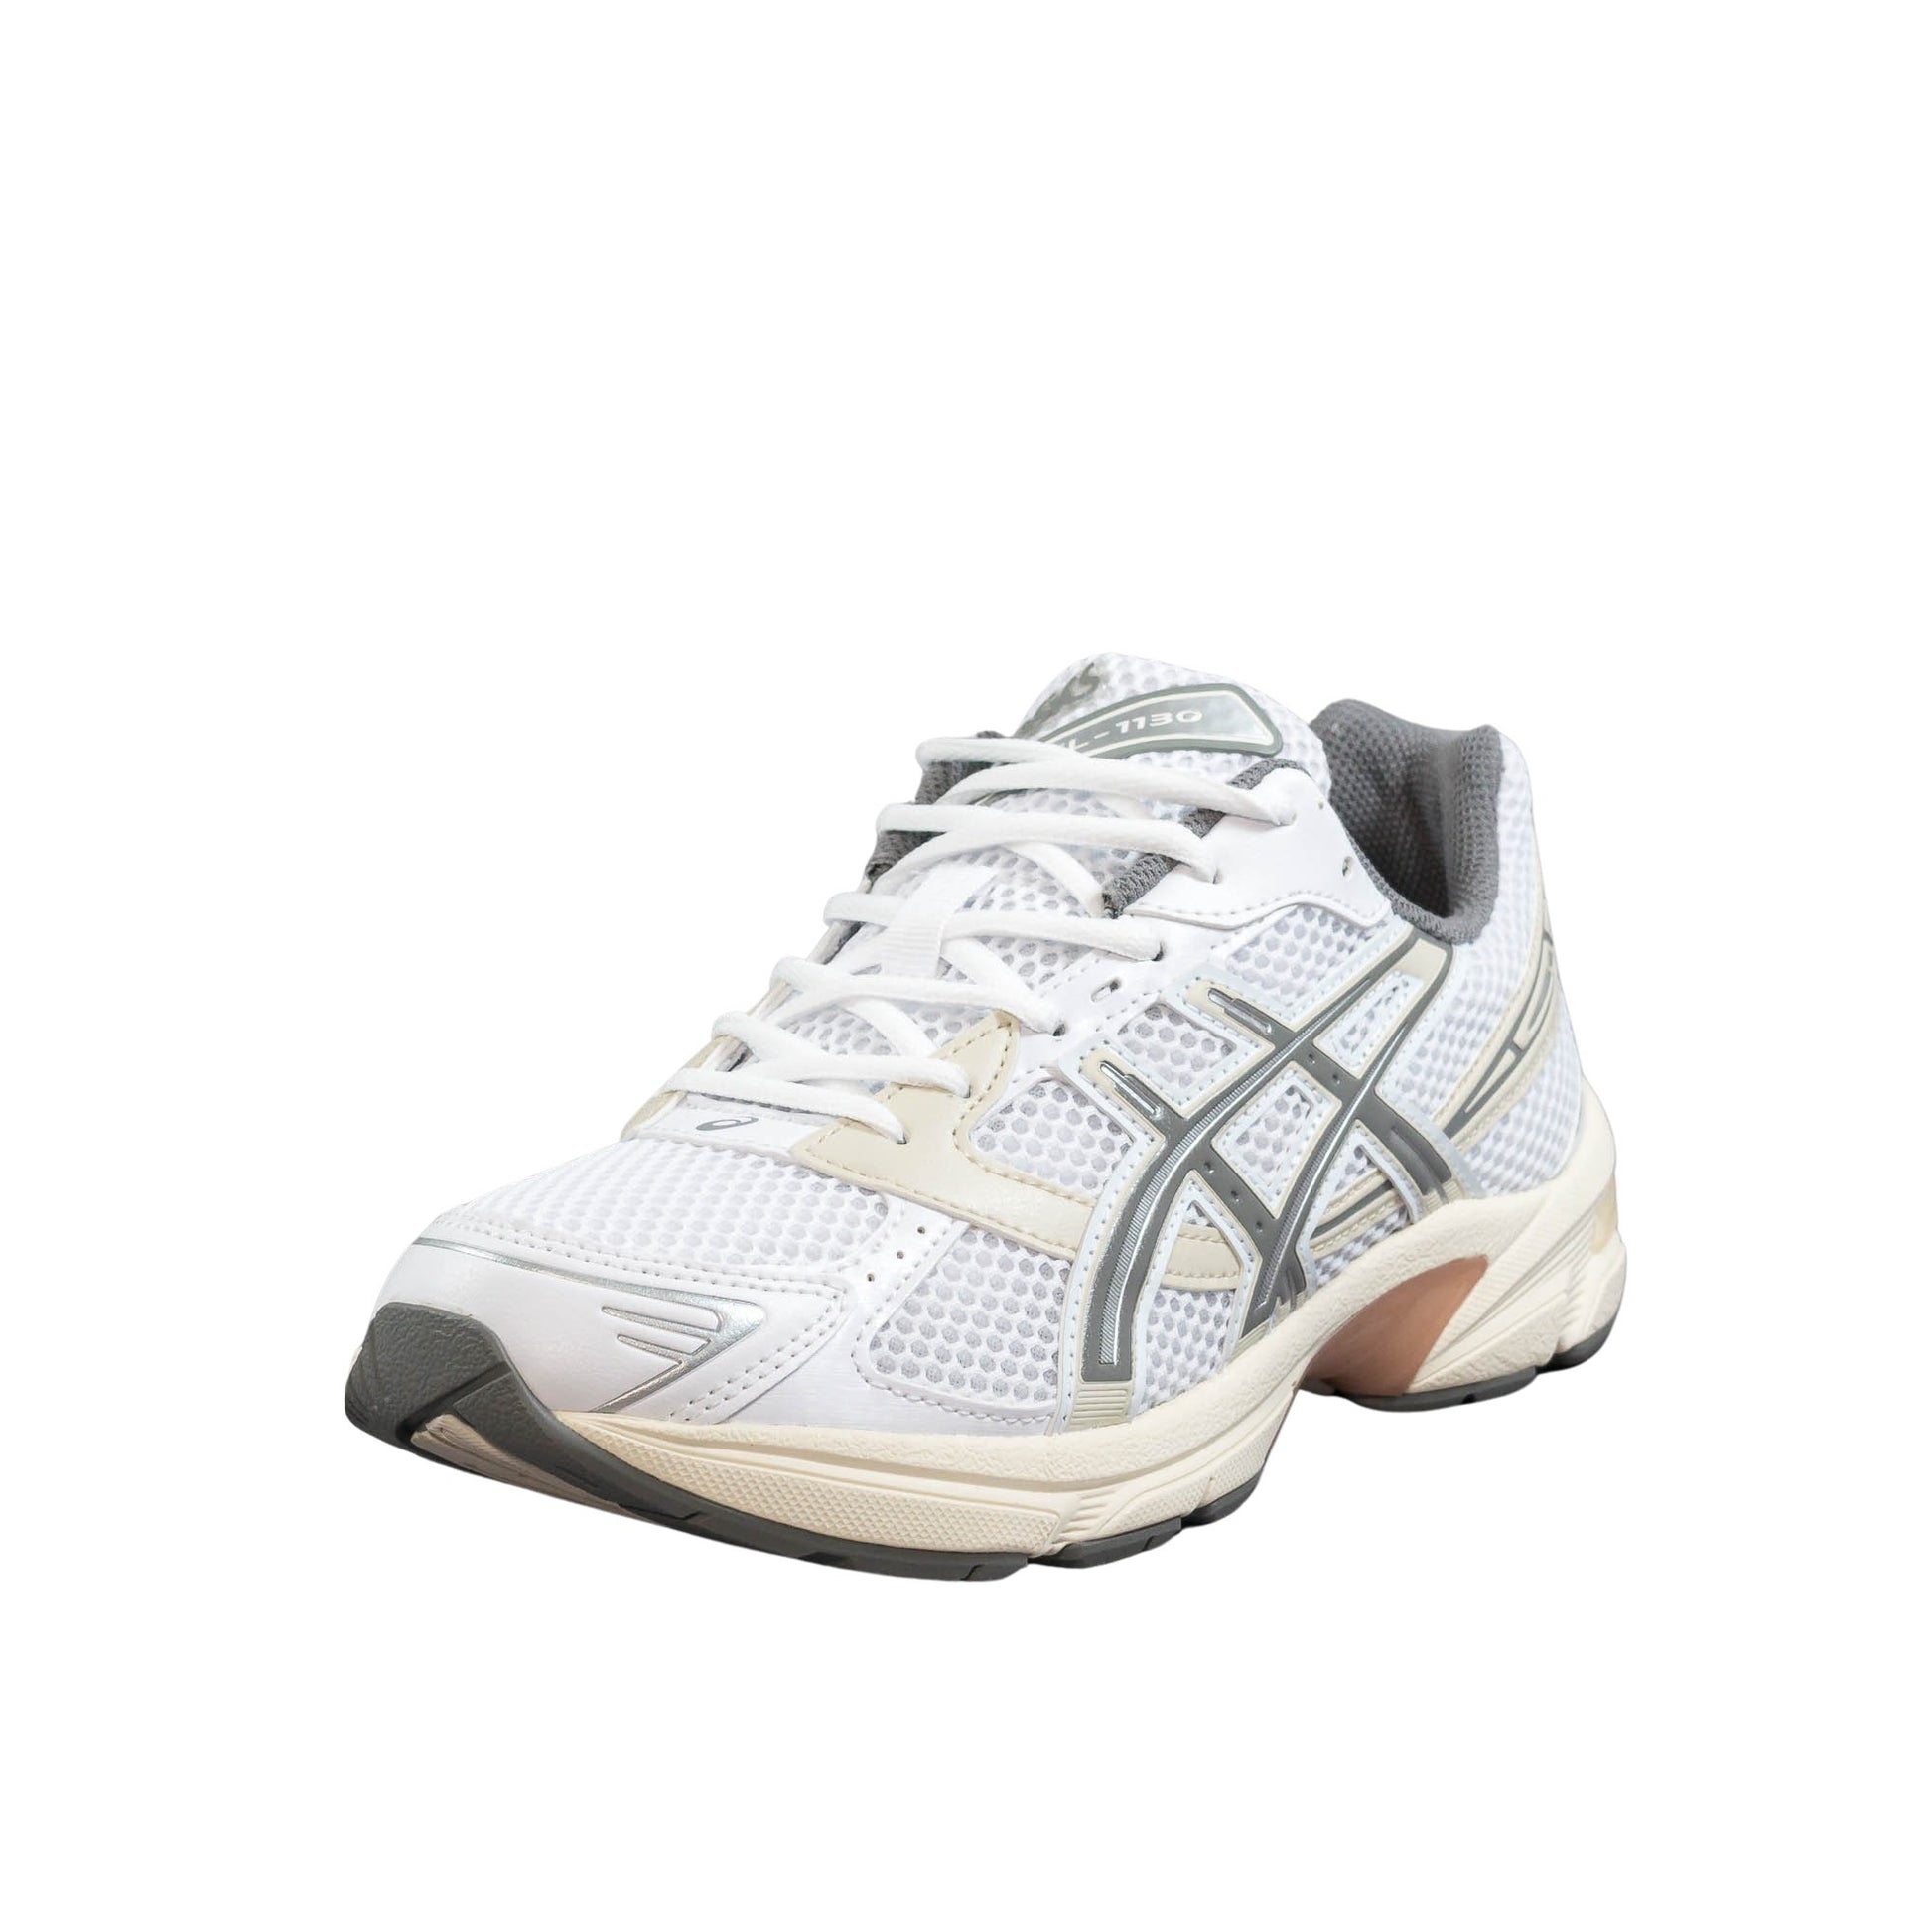 Asics Sportstyle Gel-1130 (1201A256-112) Weiss – Goldjunge-Store